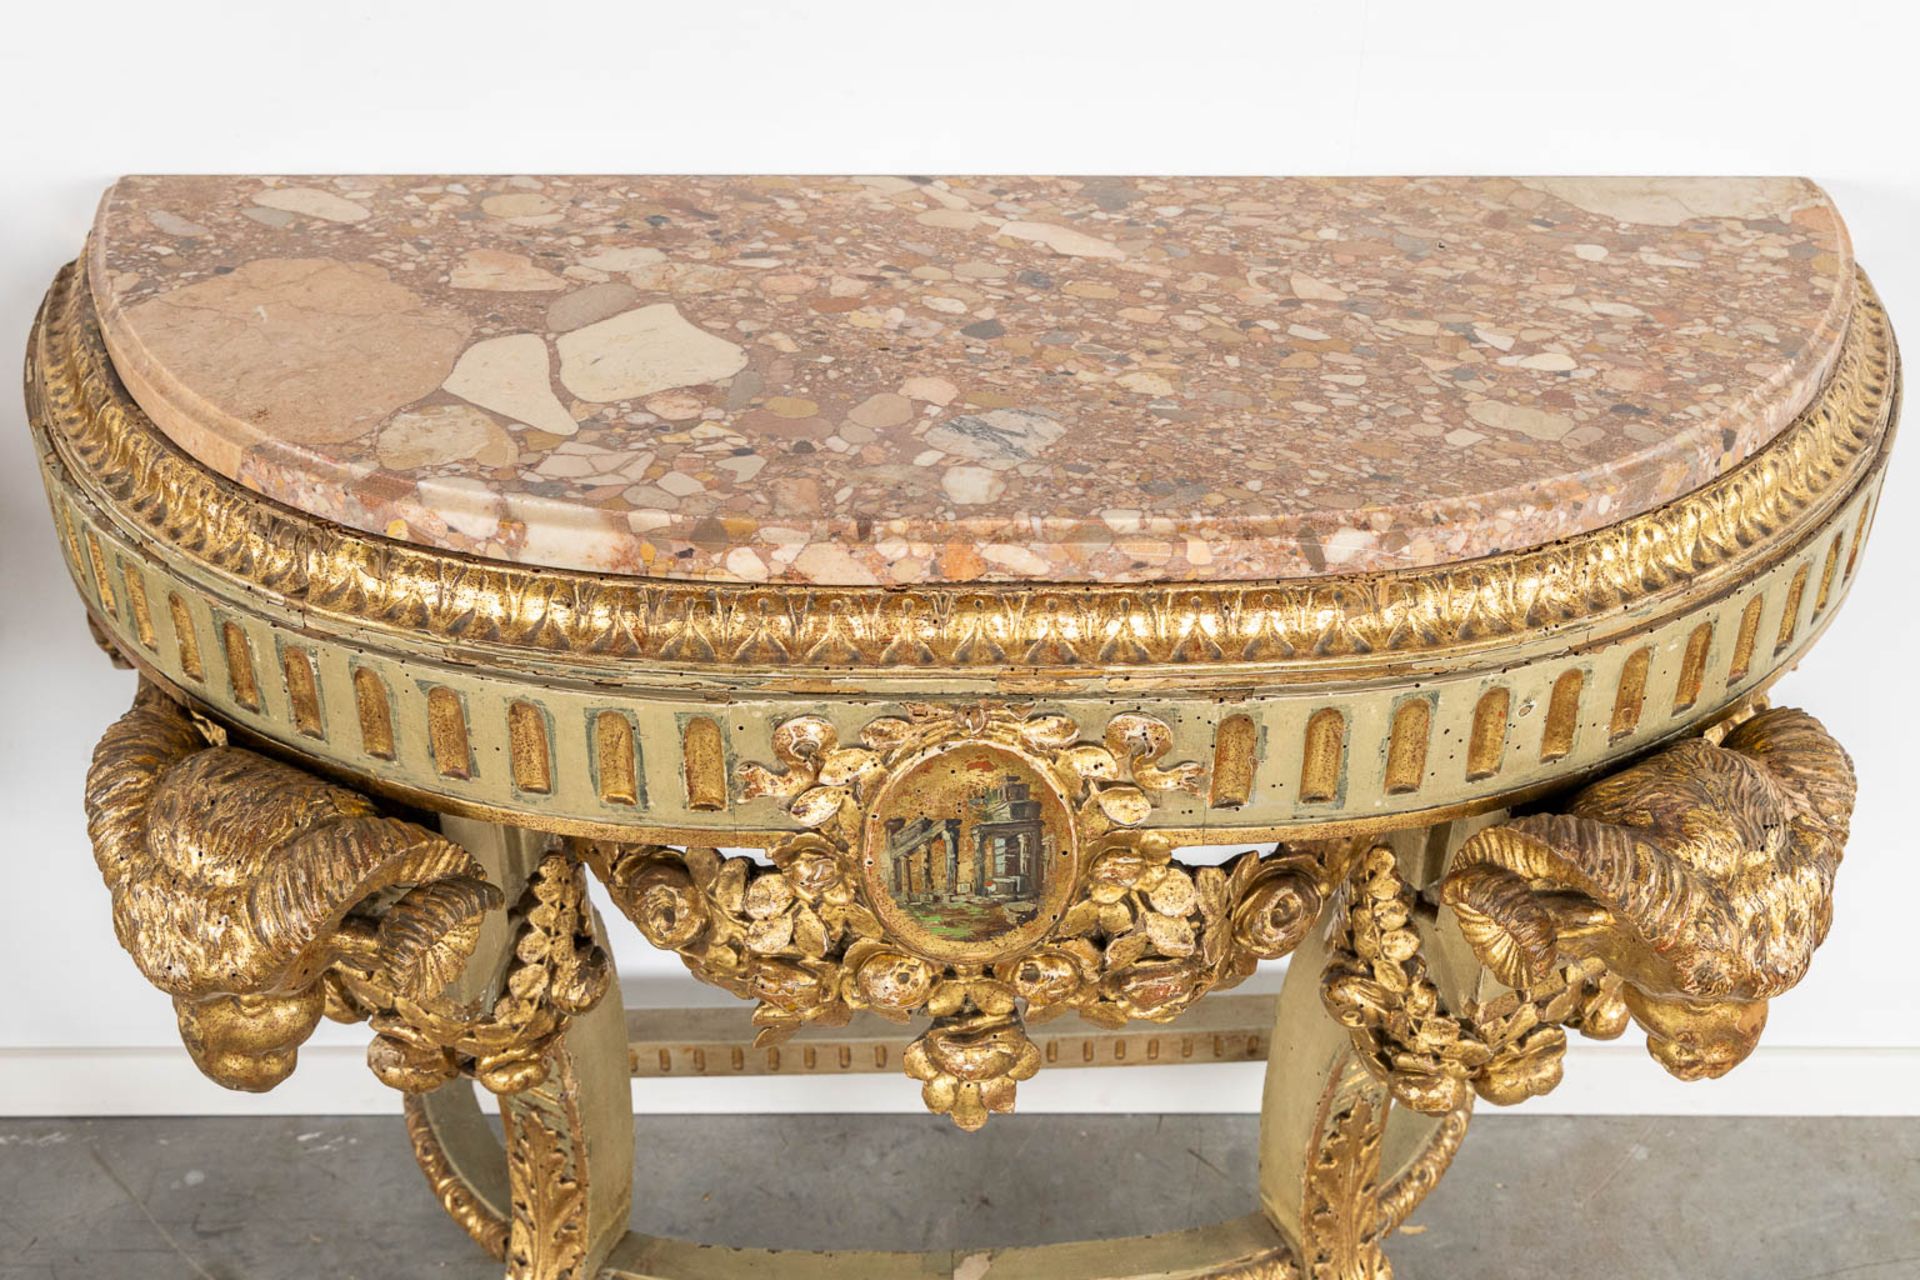 A pair of console tables with ram's heads, Louis XVI style, Italy, 19th C. (L:50 x W:110 x H:84 cm) - Image 7 of 10